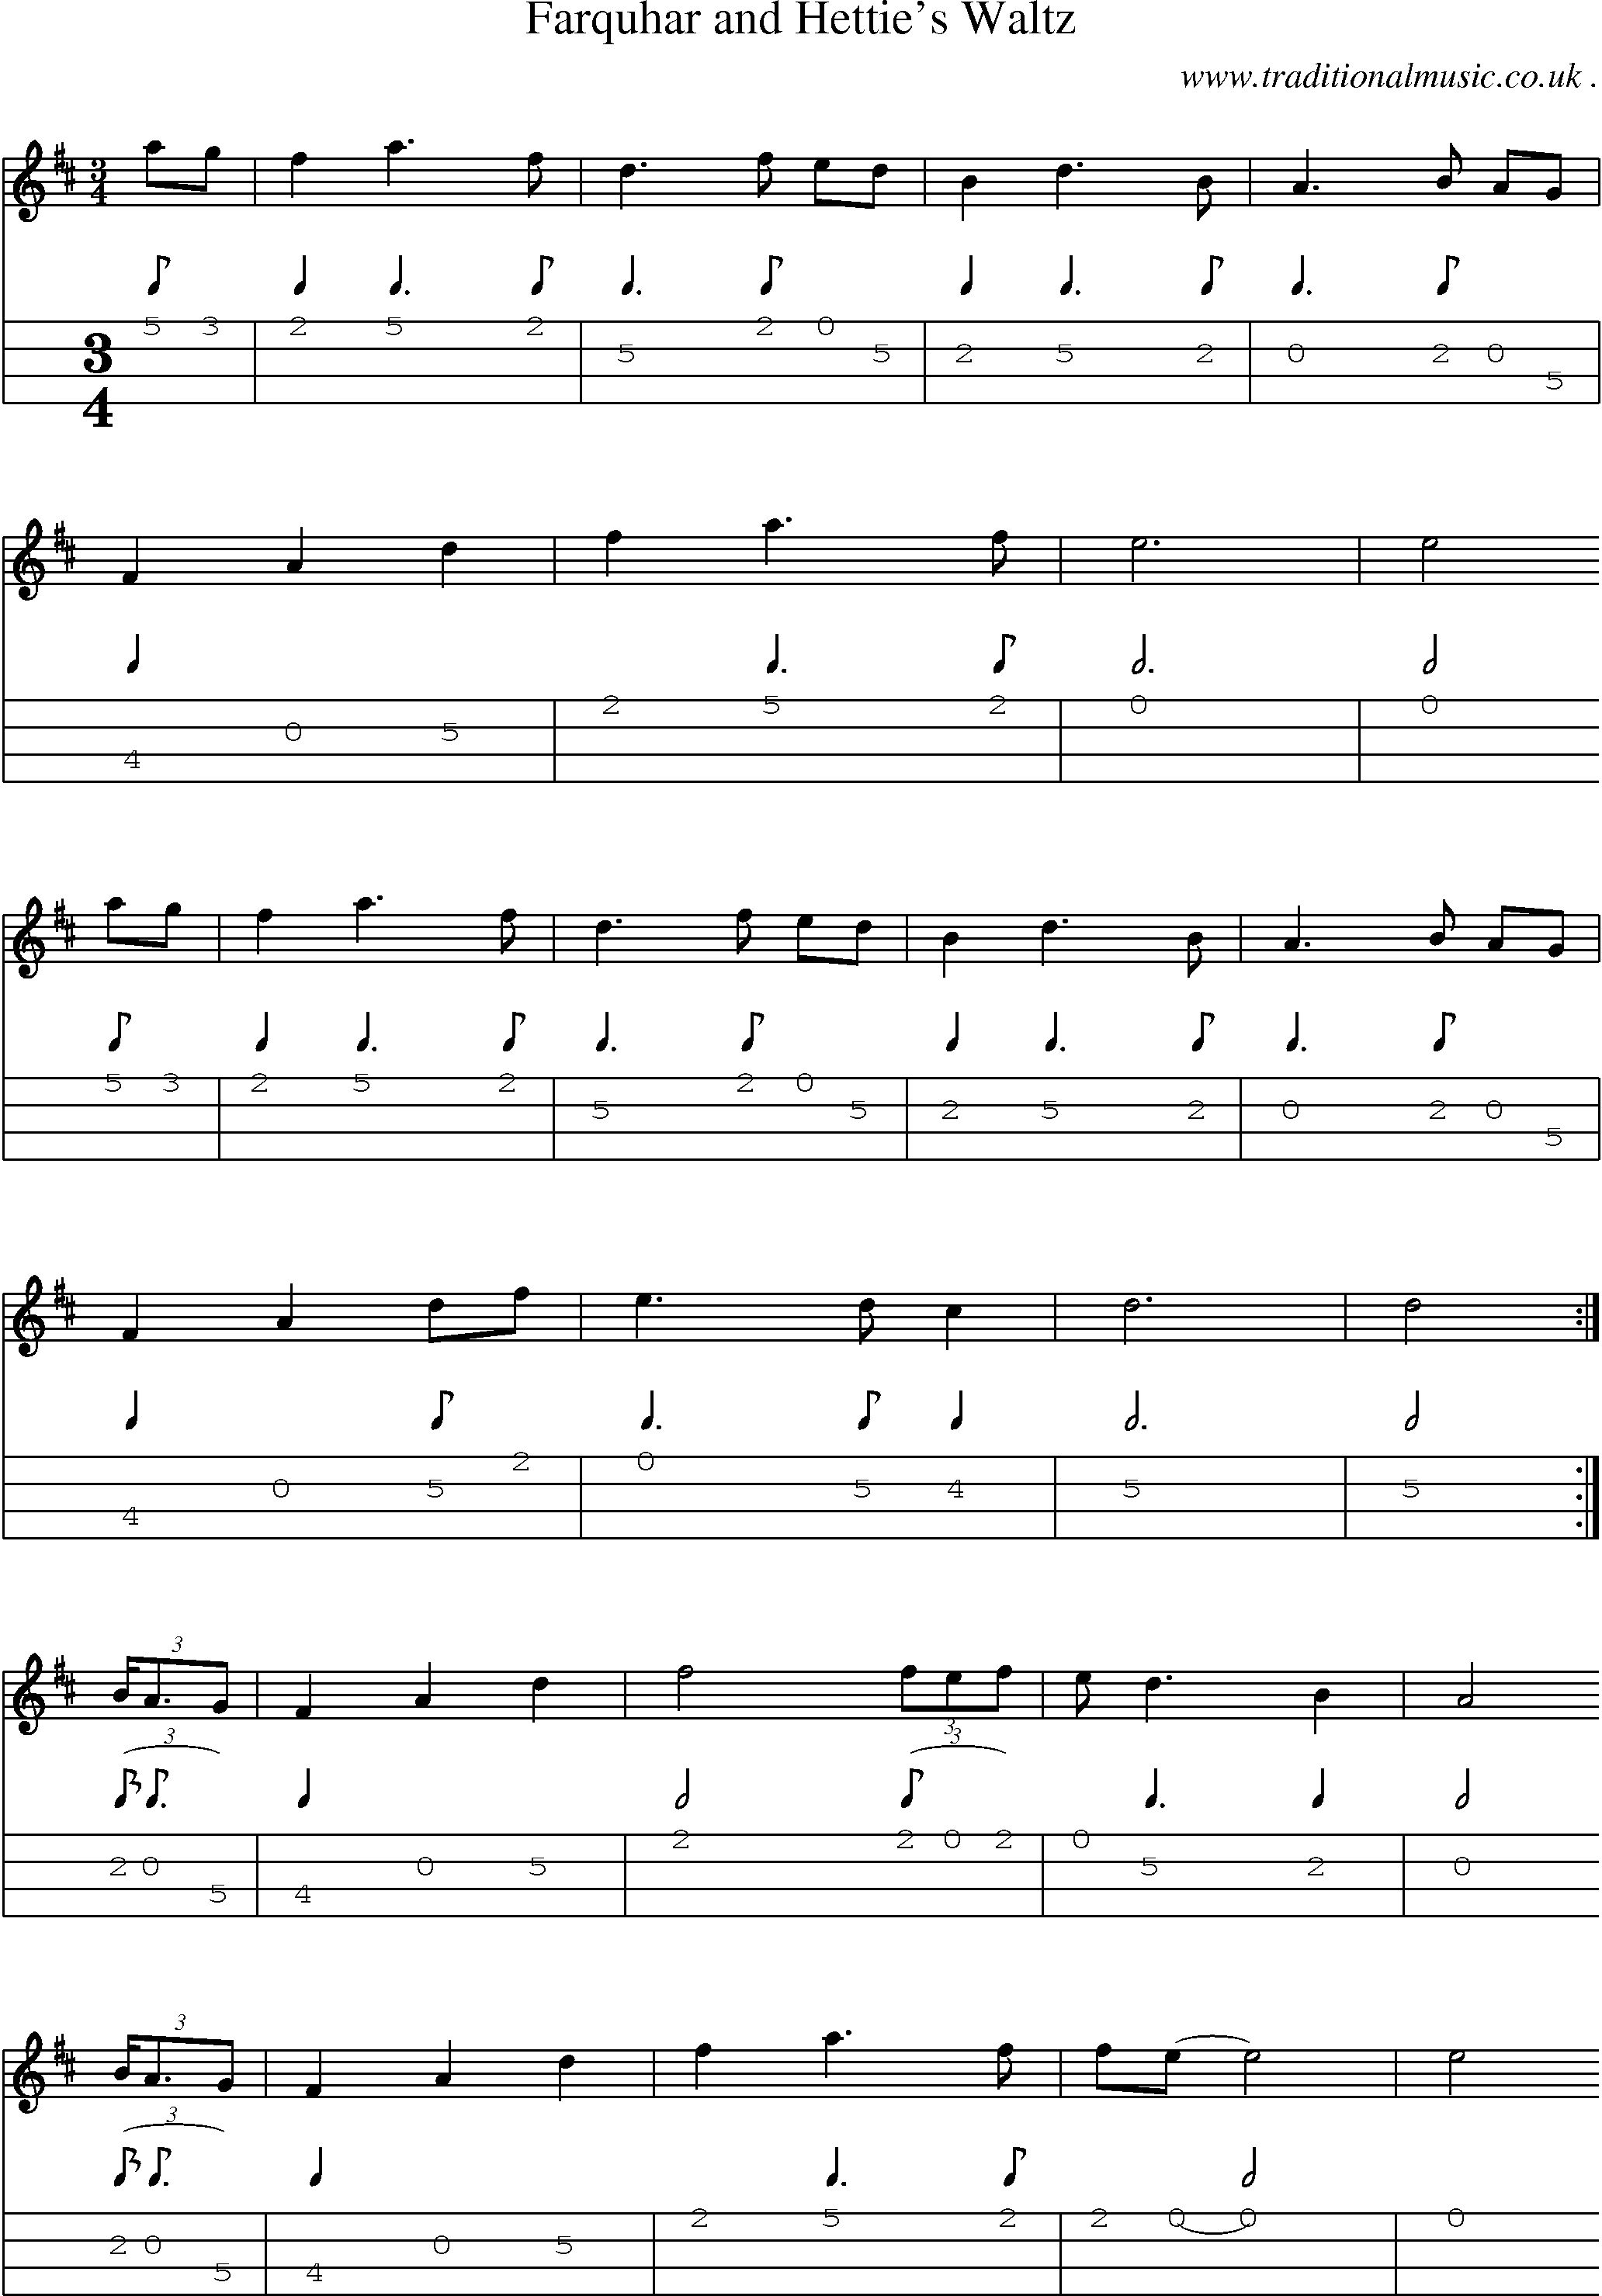 Sheet-music  score, Chords and Mandolin Tabs for Farquhar And Hetties Waltz